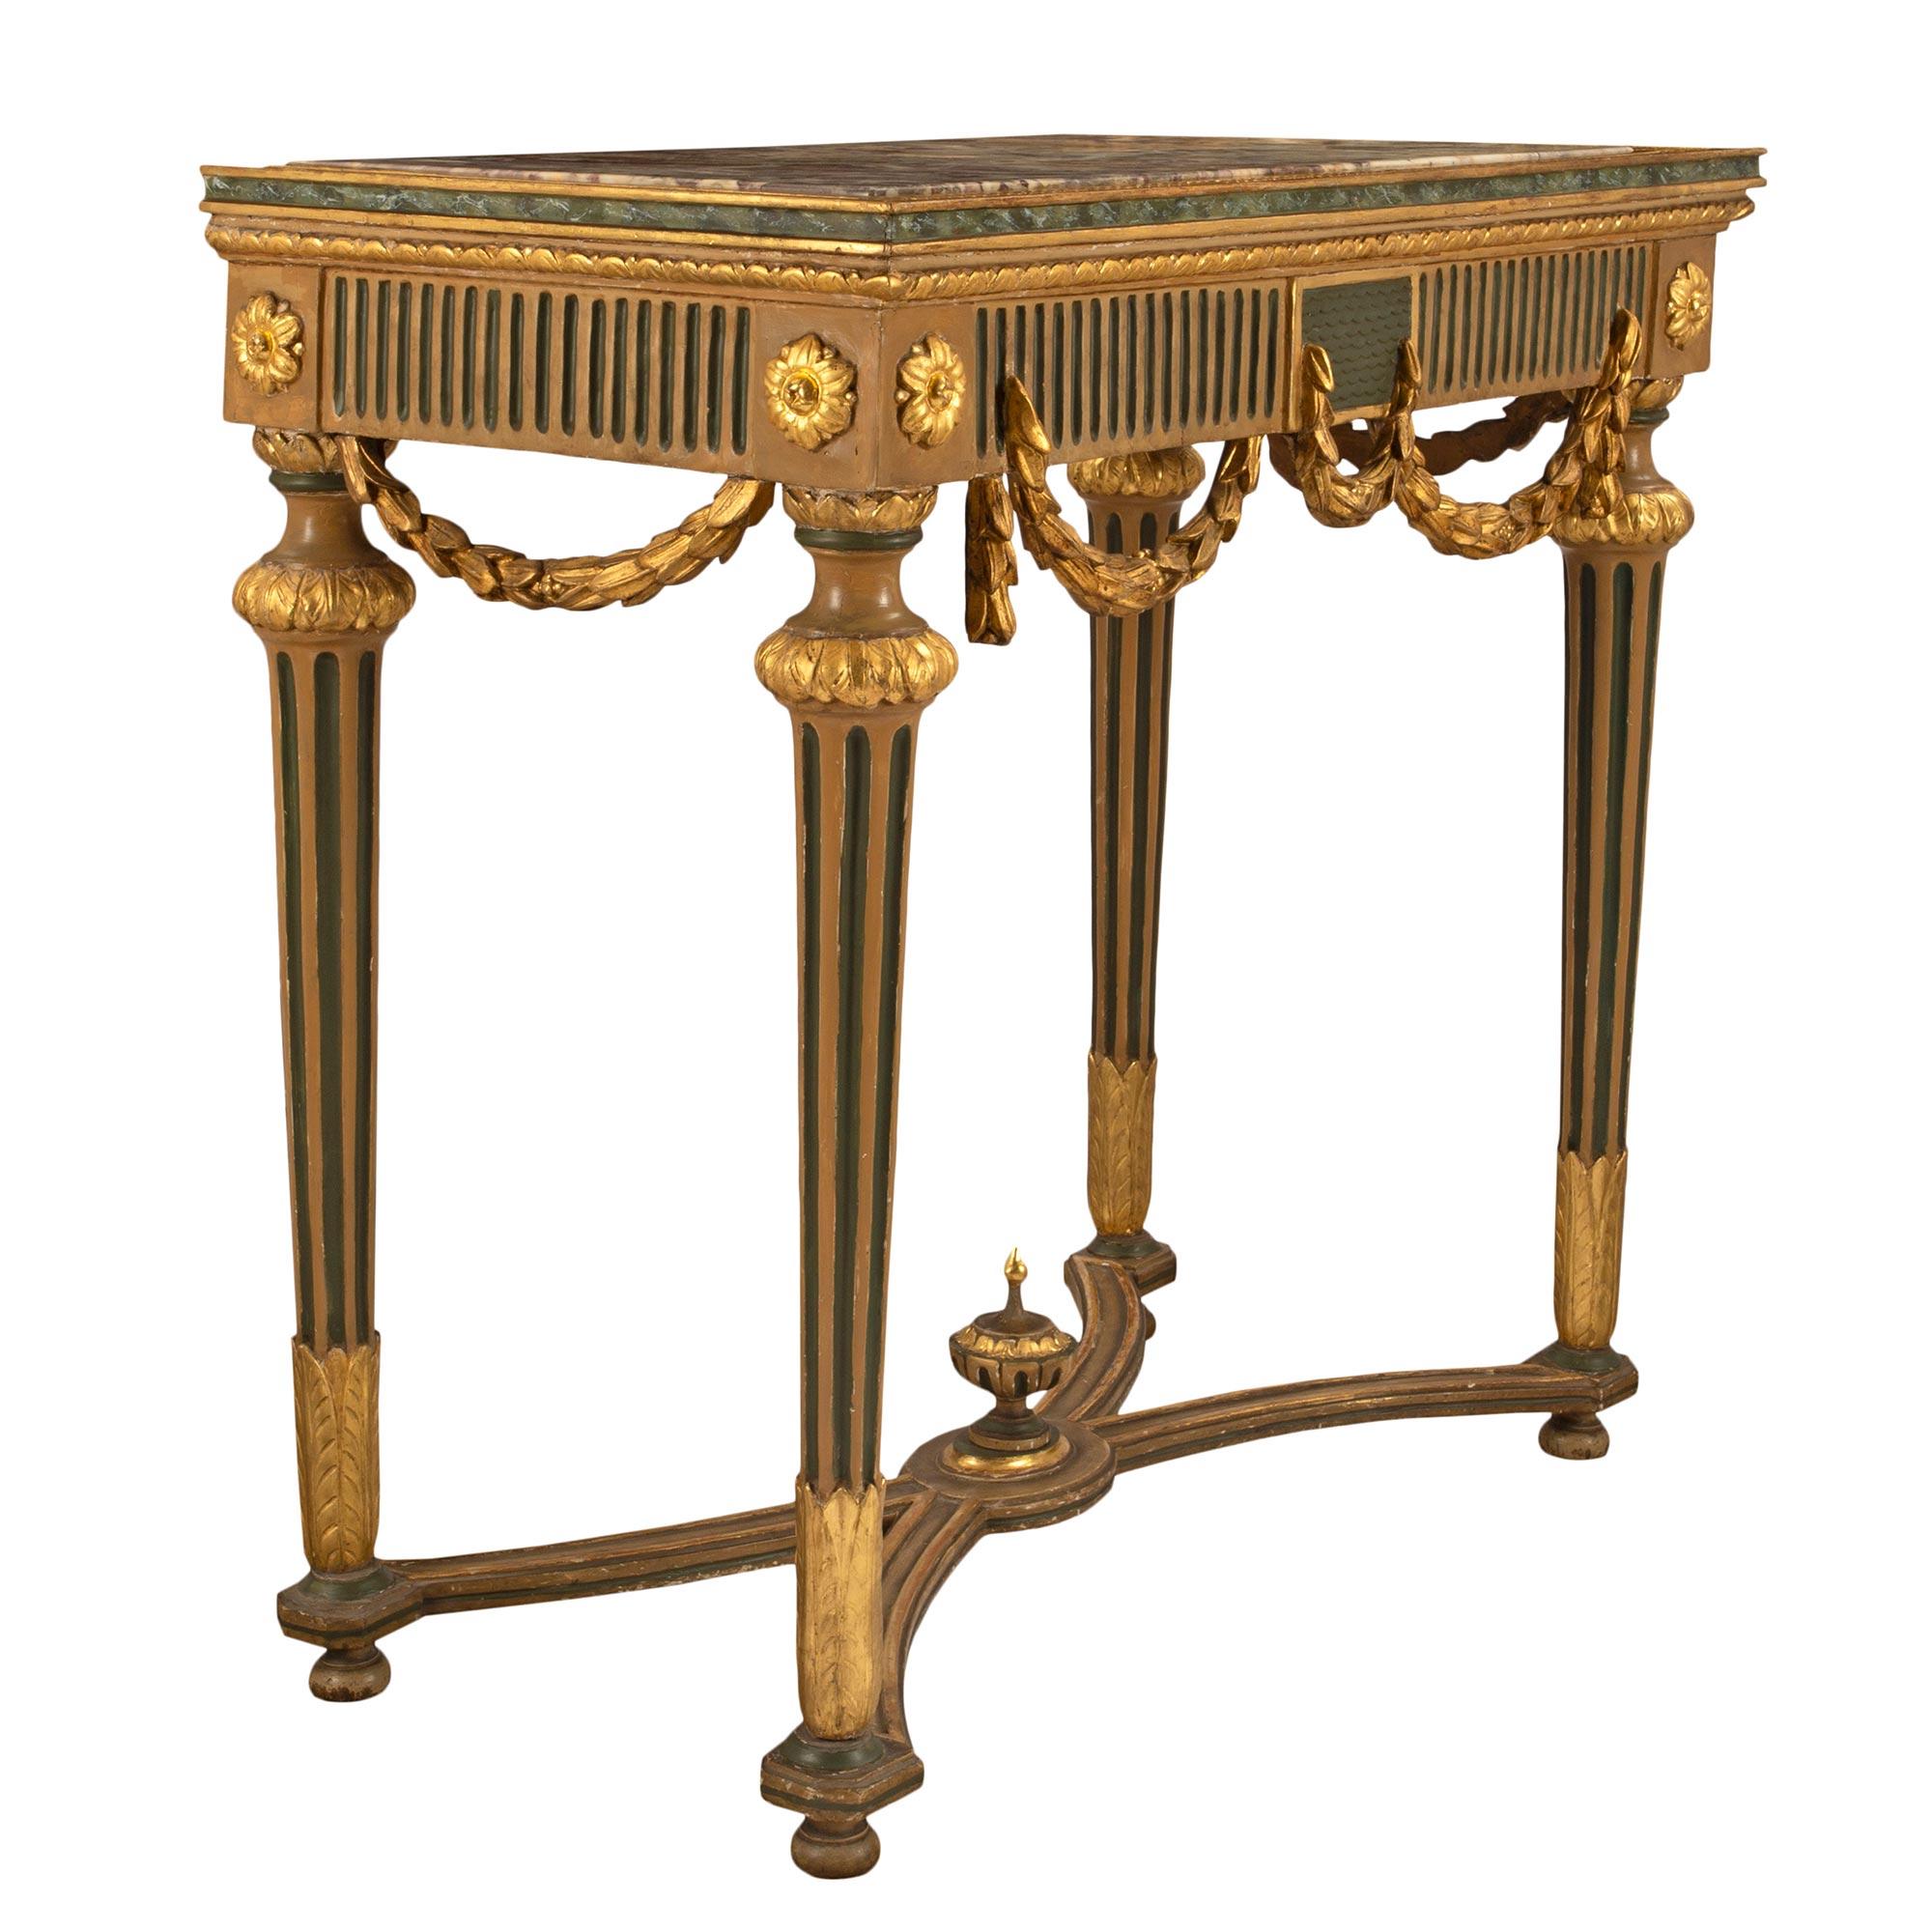 Italian 18th Century Louis XVI Period Giltwood and Marble Console In Good Condition For Sale In West Palm Beach, FL